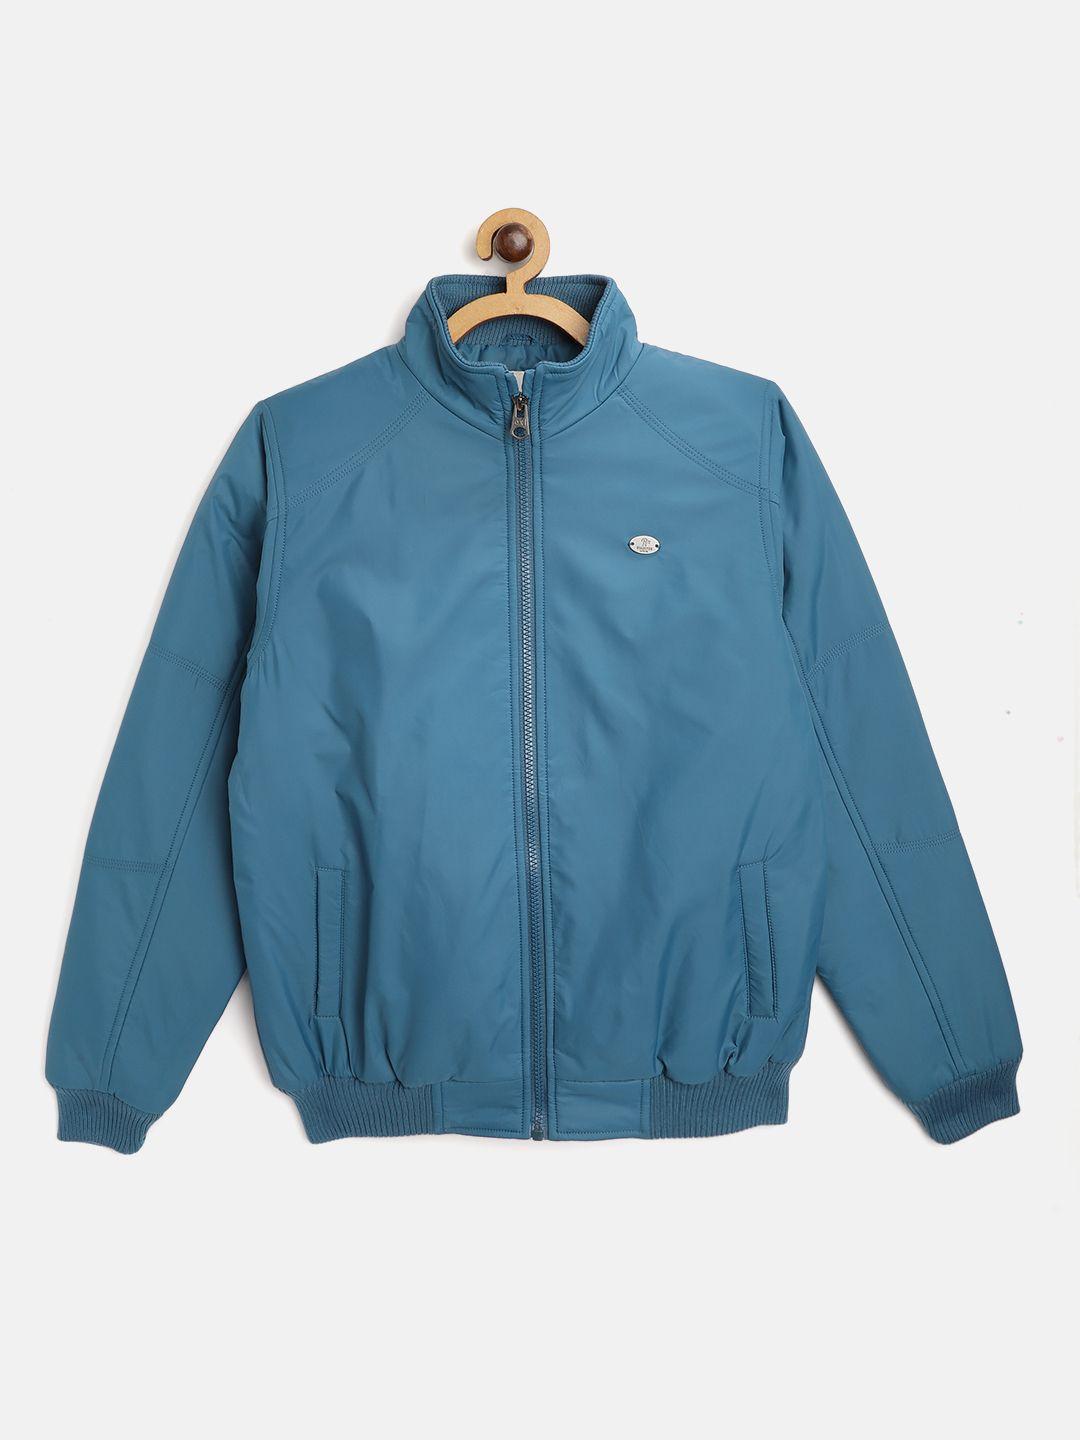 uth by roadster boys teal blue solid bomber jacket